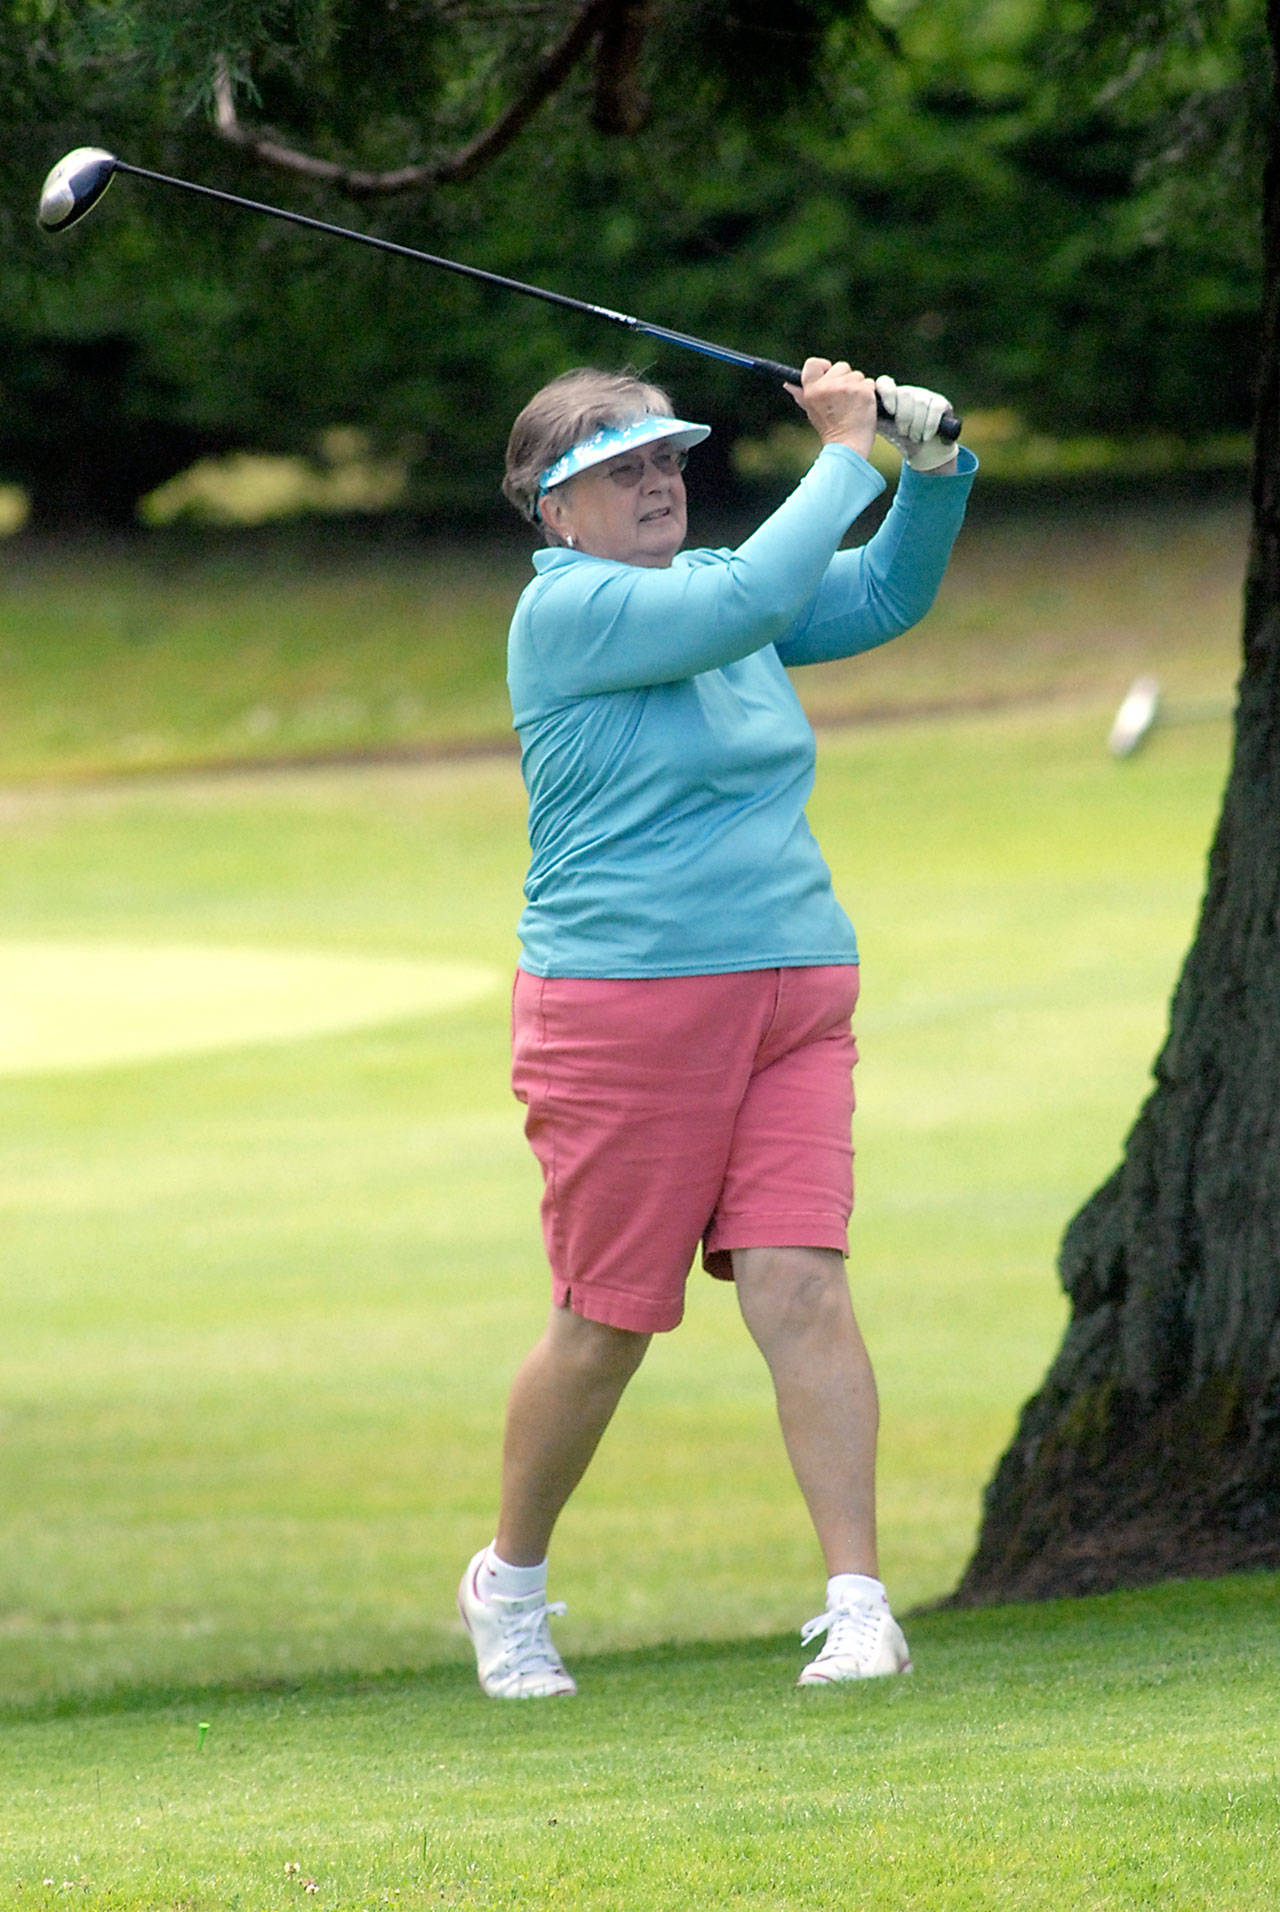 GOLF: Former Roughrider Cook leads Clallam Amateur